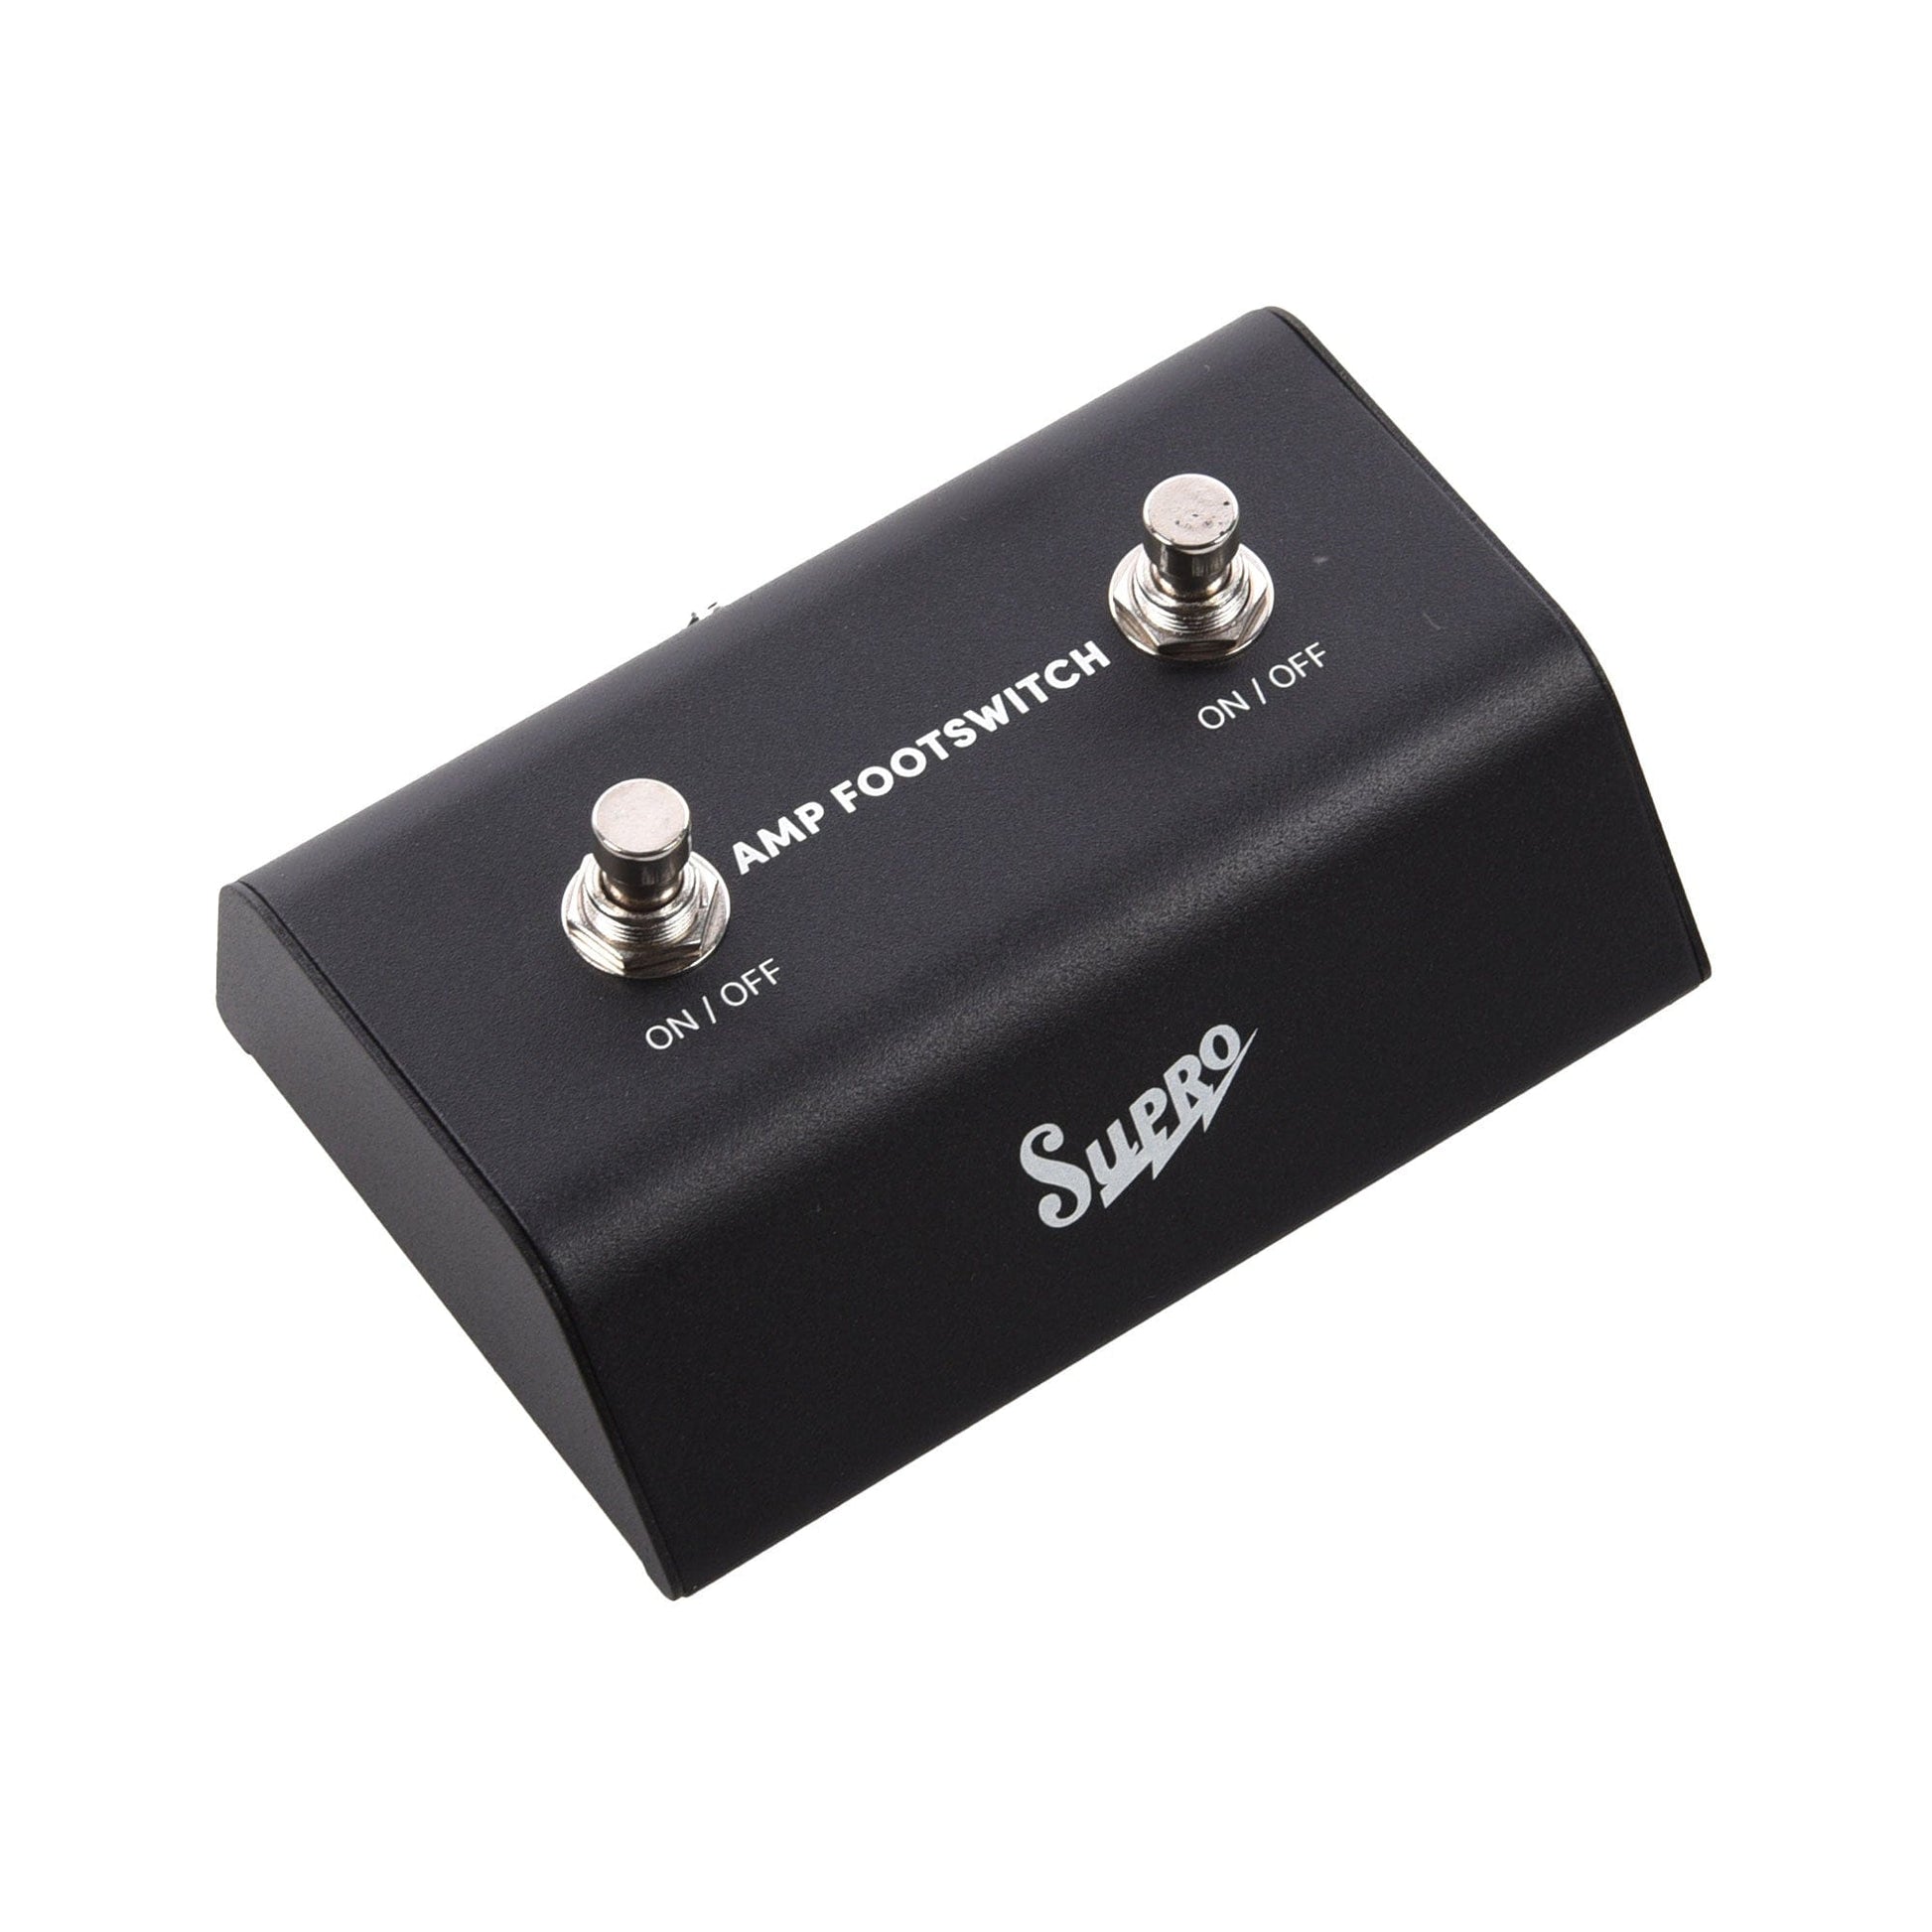 Supro Dual Amp Footswitch Effects and Pedals / Controllers, Volume and Expression